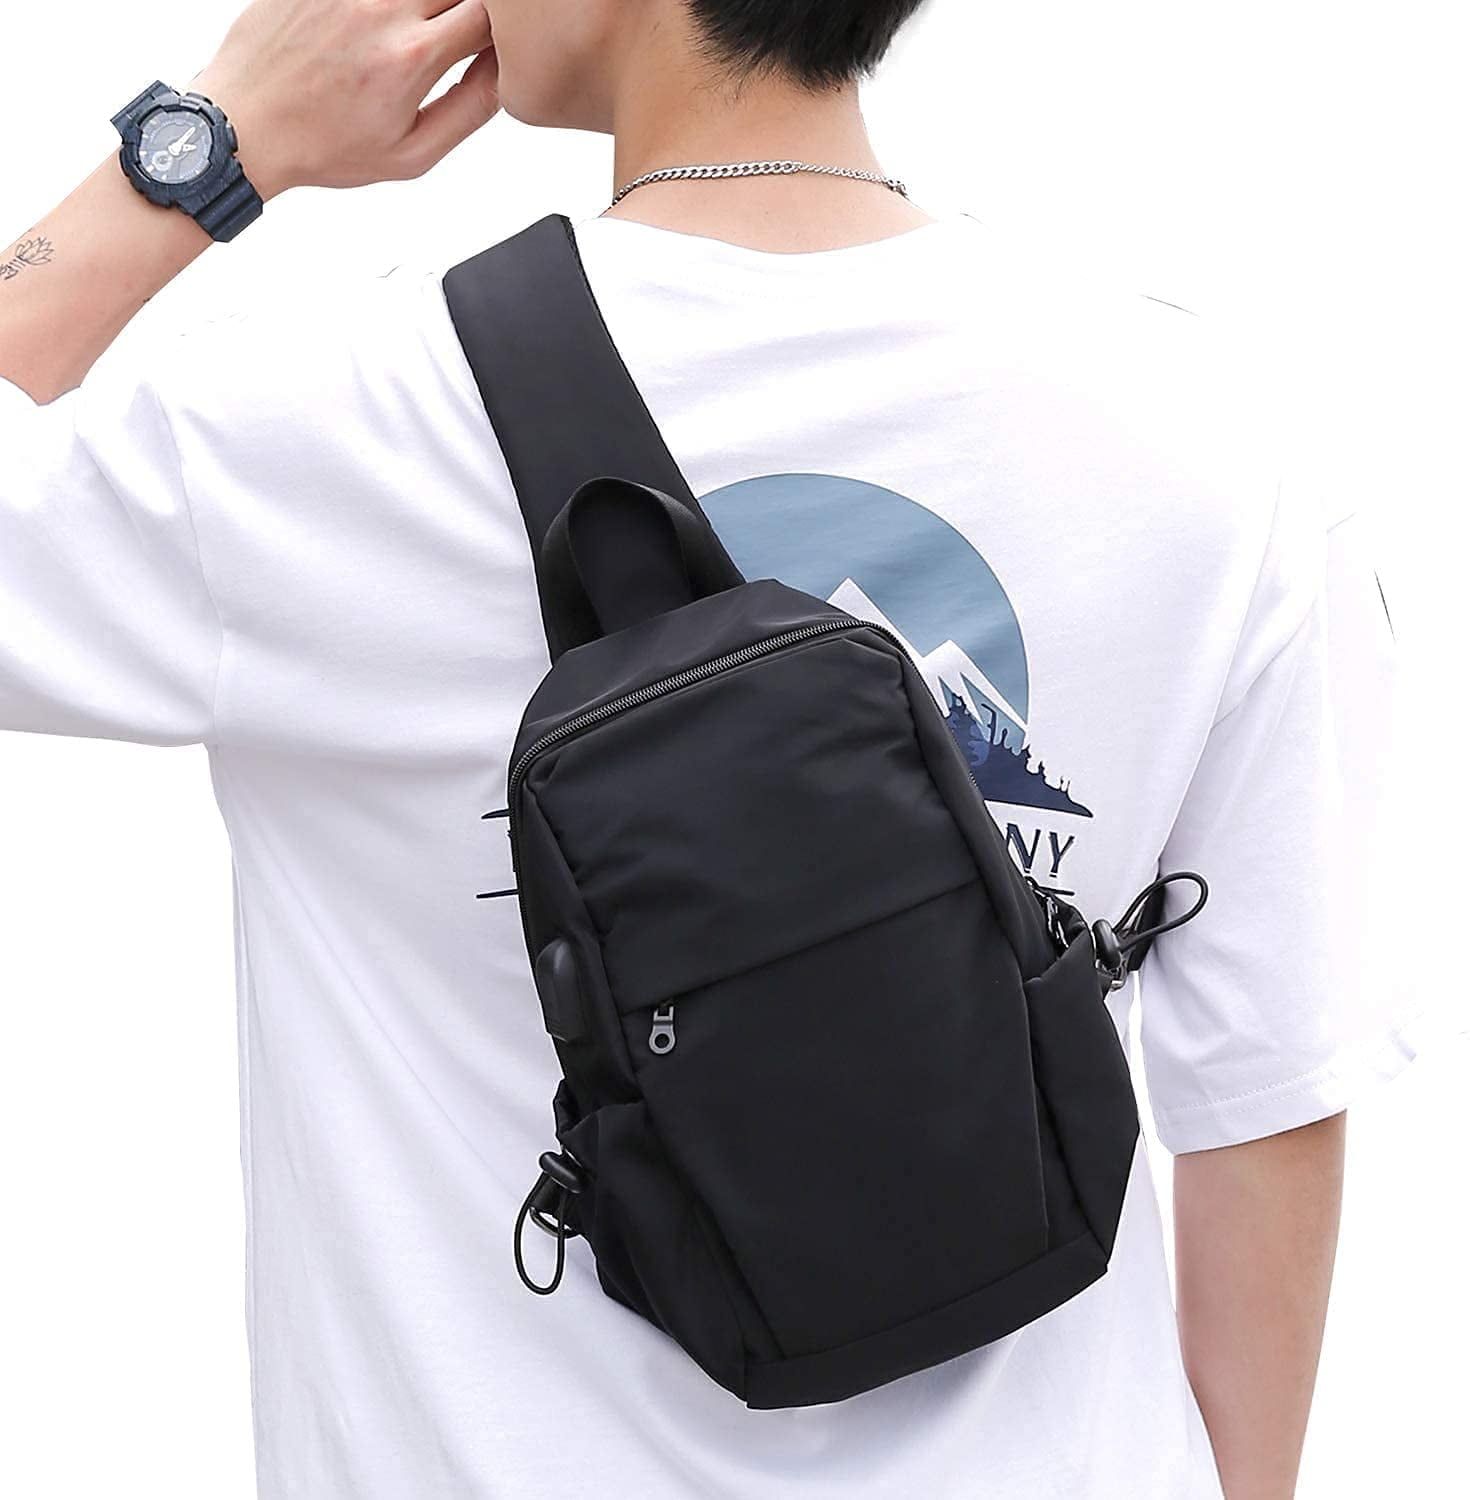 Men Women Small Sling Bag Nylon Water Resistant One Strap Backpack Shoulder Crossbody Bags with USB Charging Port Black